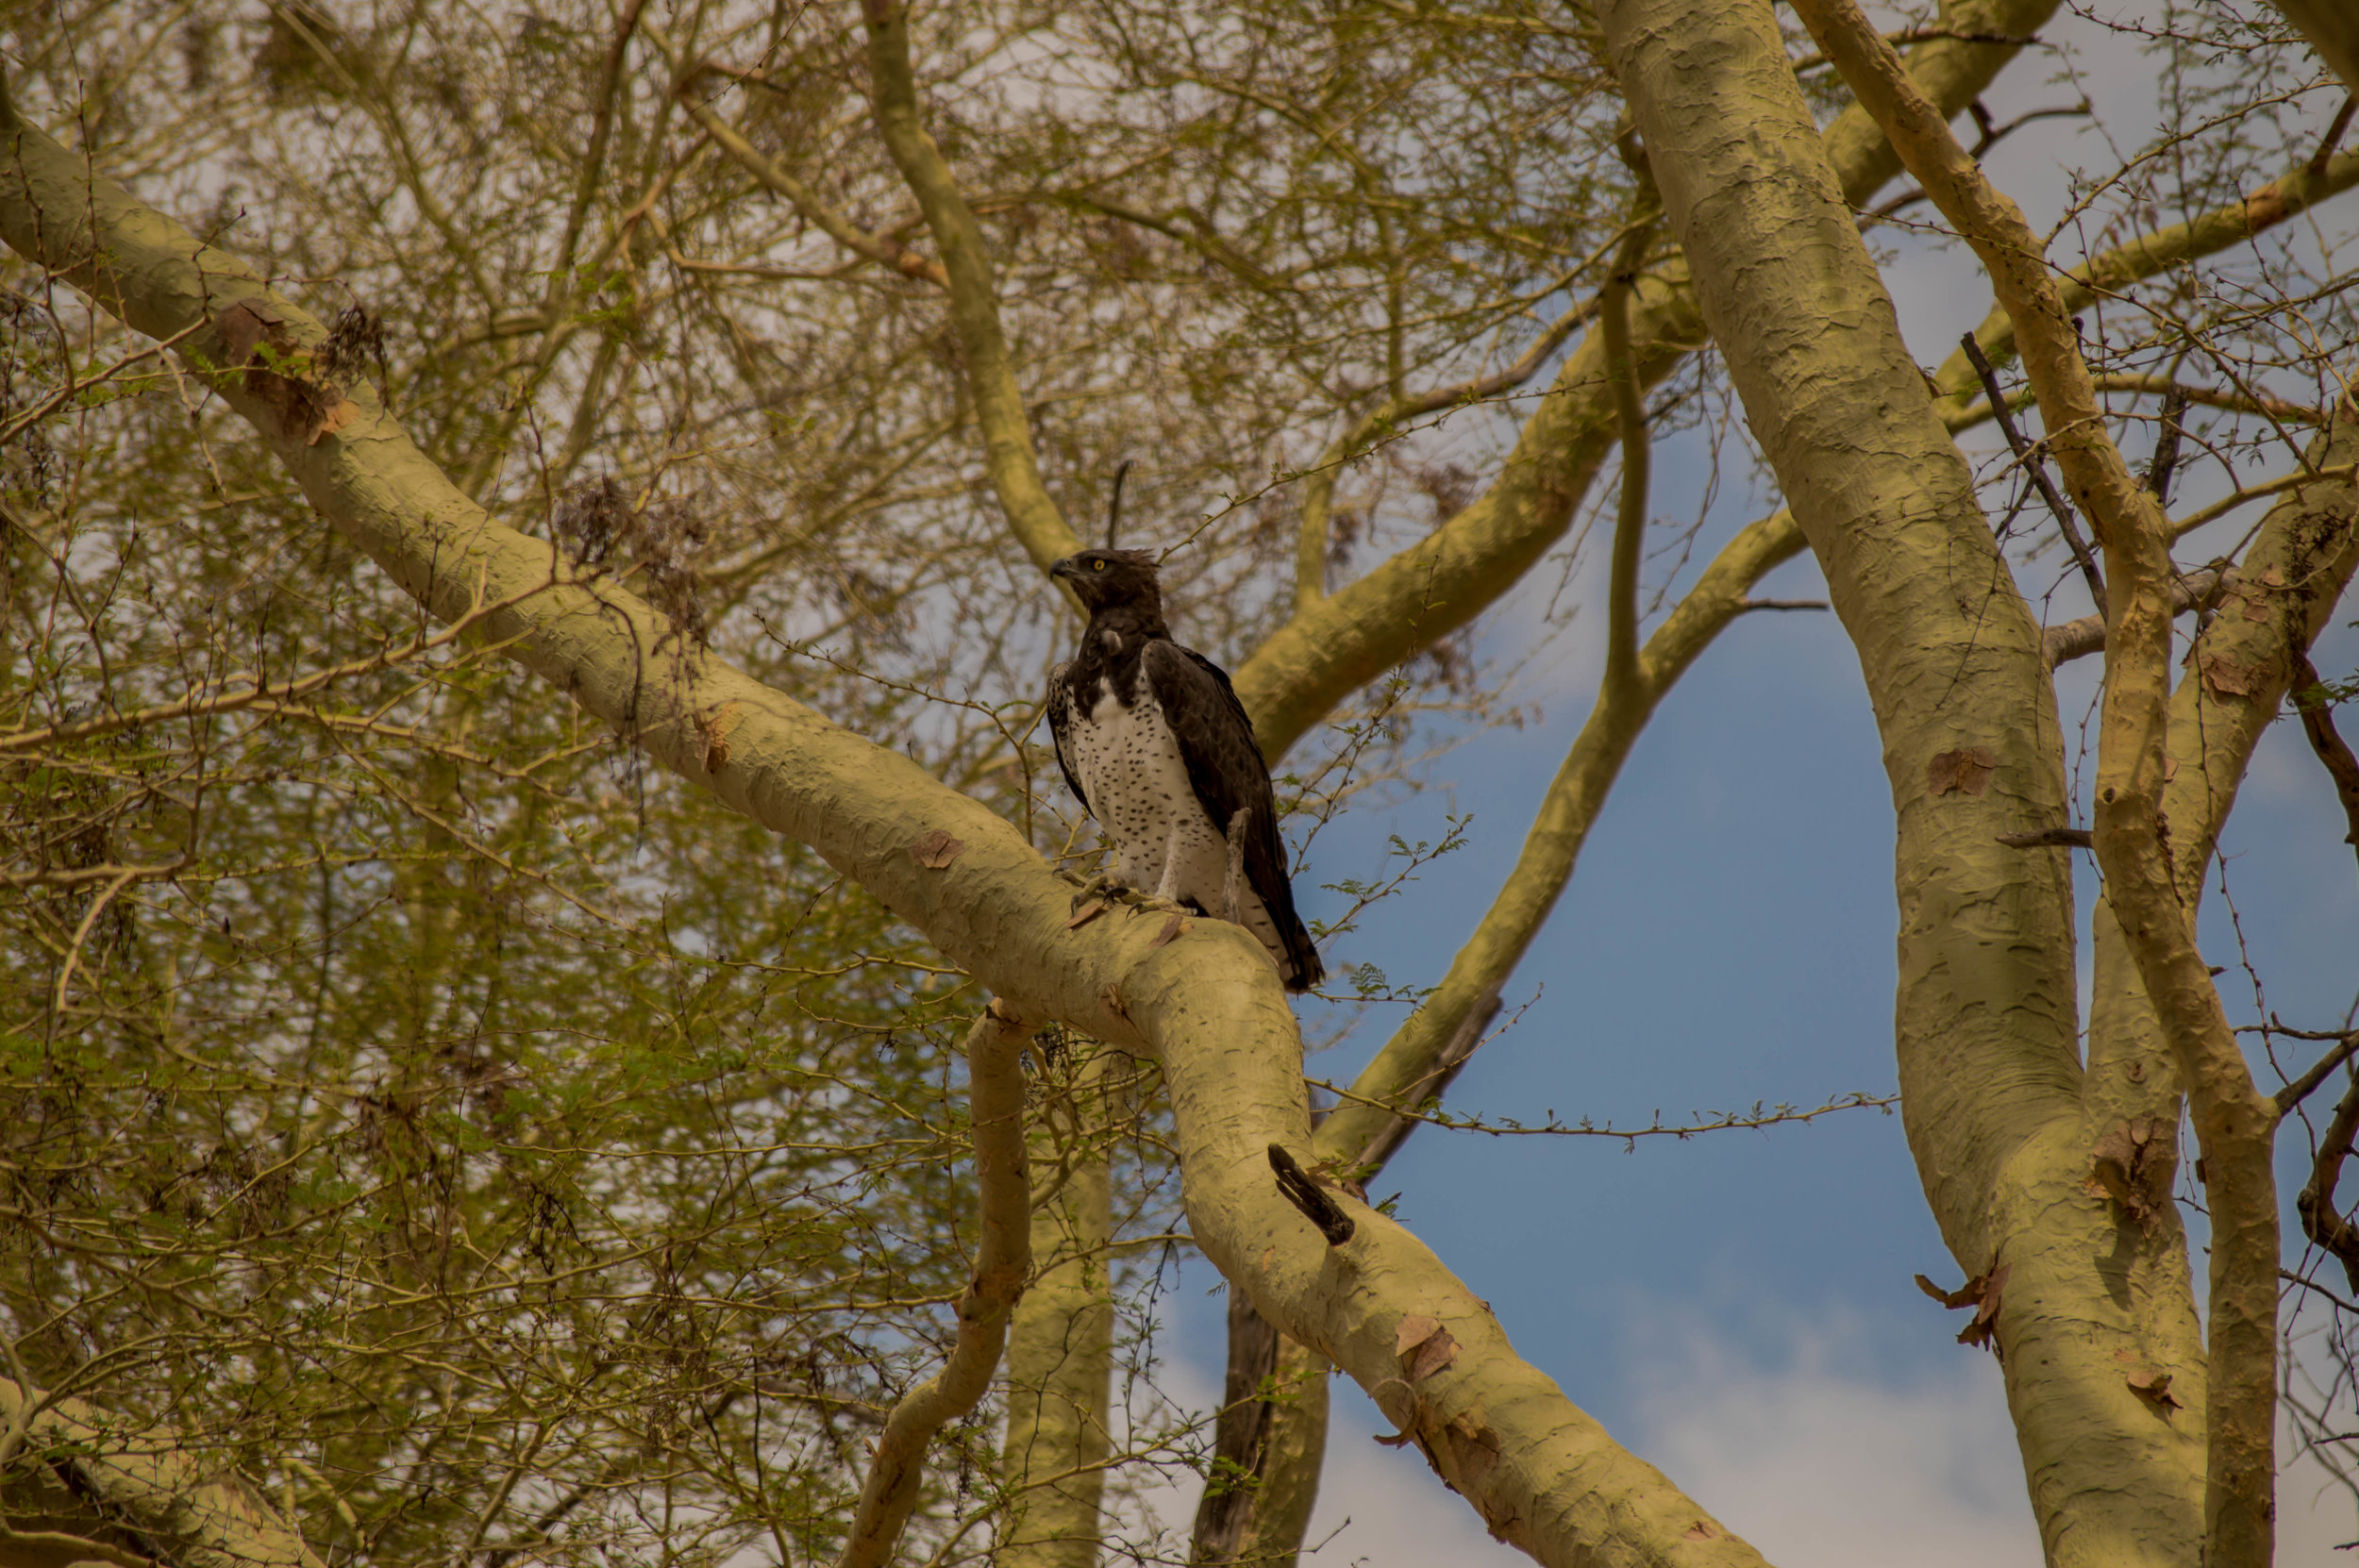 A BIRDER’S PARADISE: A Martial Eagle, the largest eagle in Africa, captured in the Fever Tree Forest.